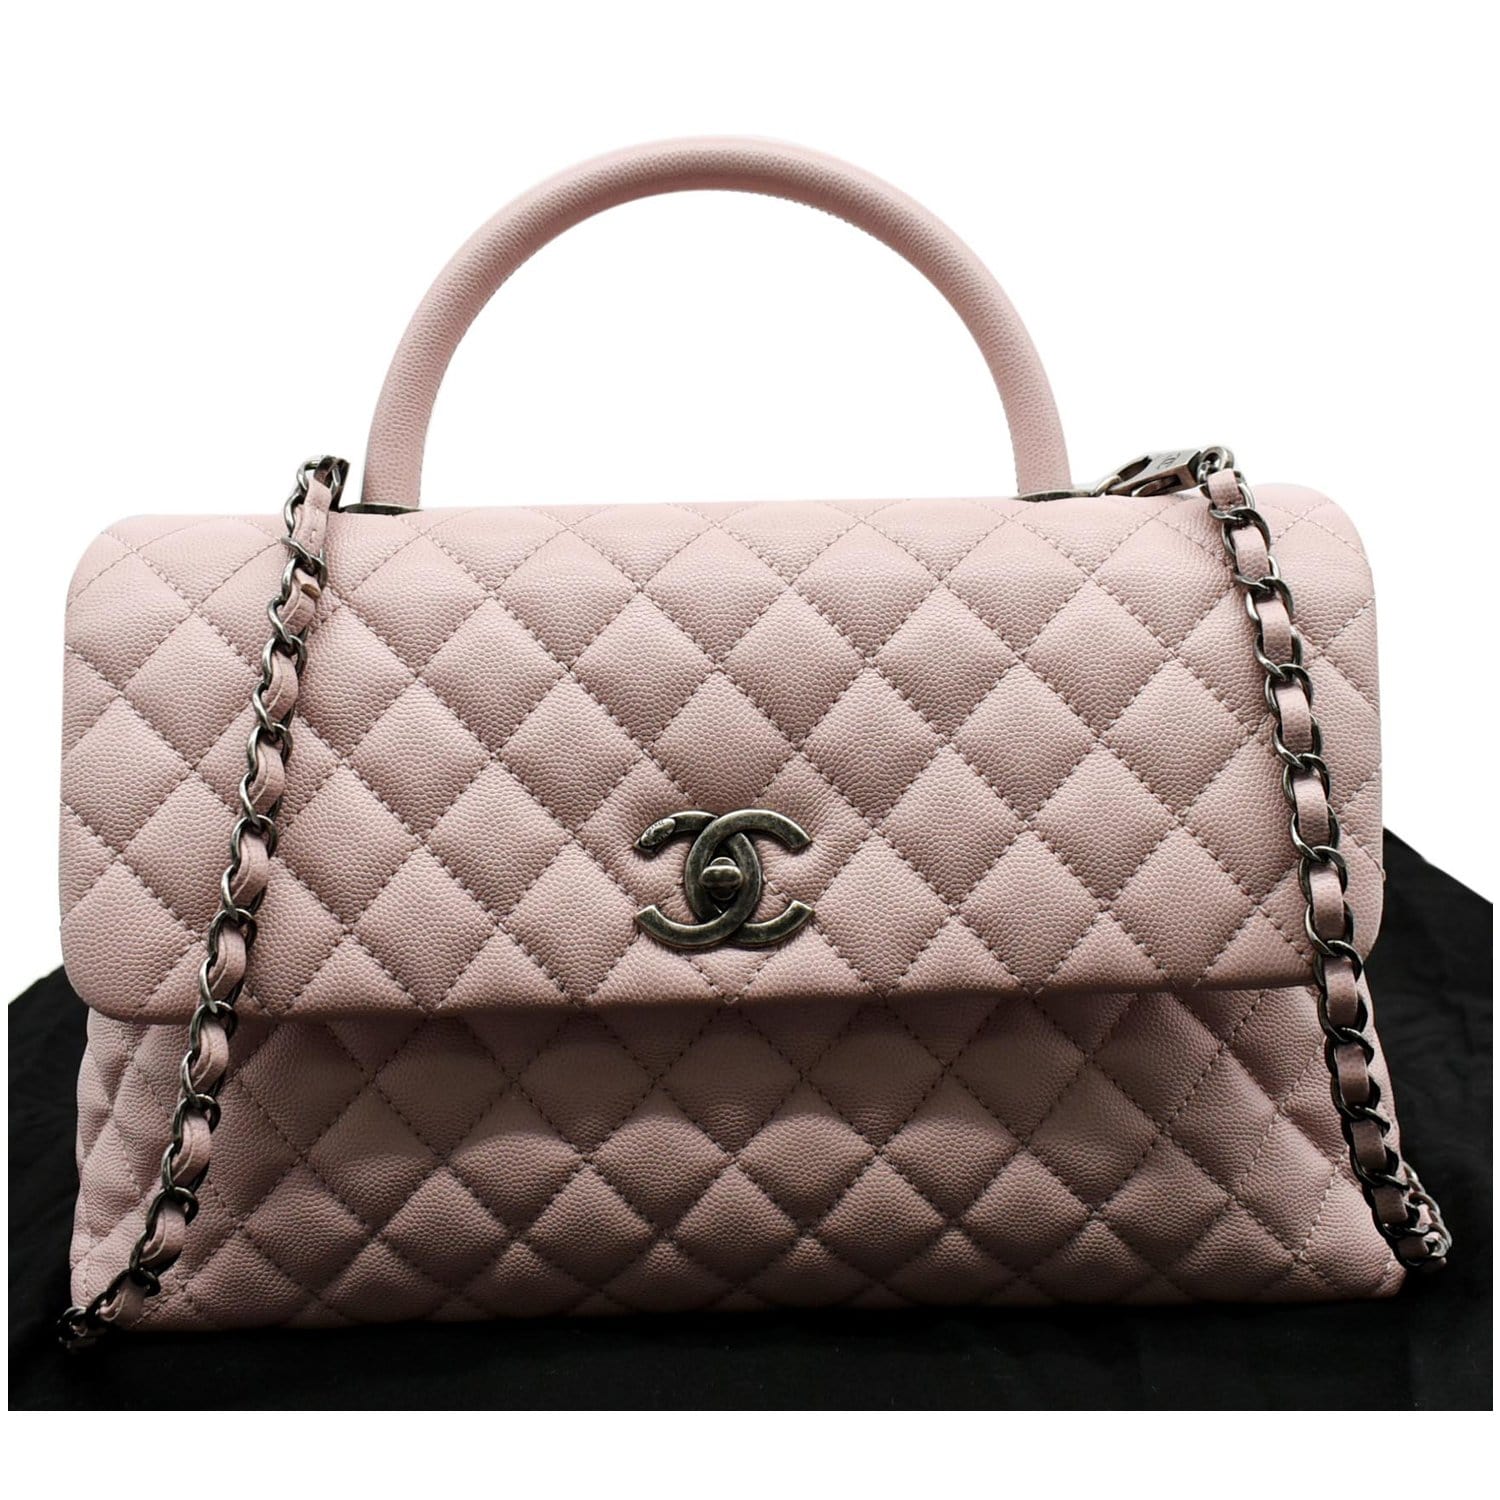 CHANEL White Coco Handle Shoulder Bag Quilted Caviar Leather